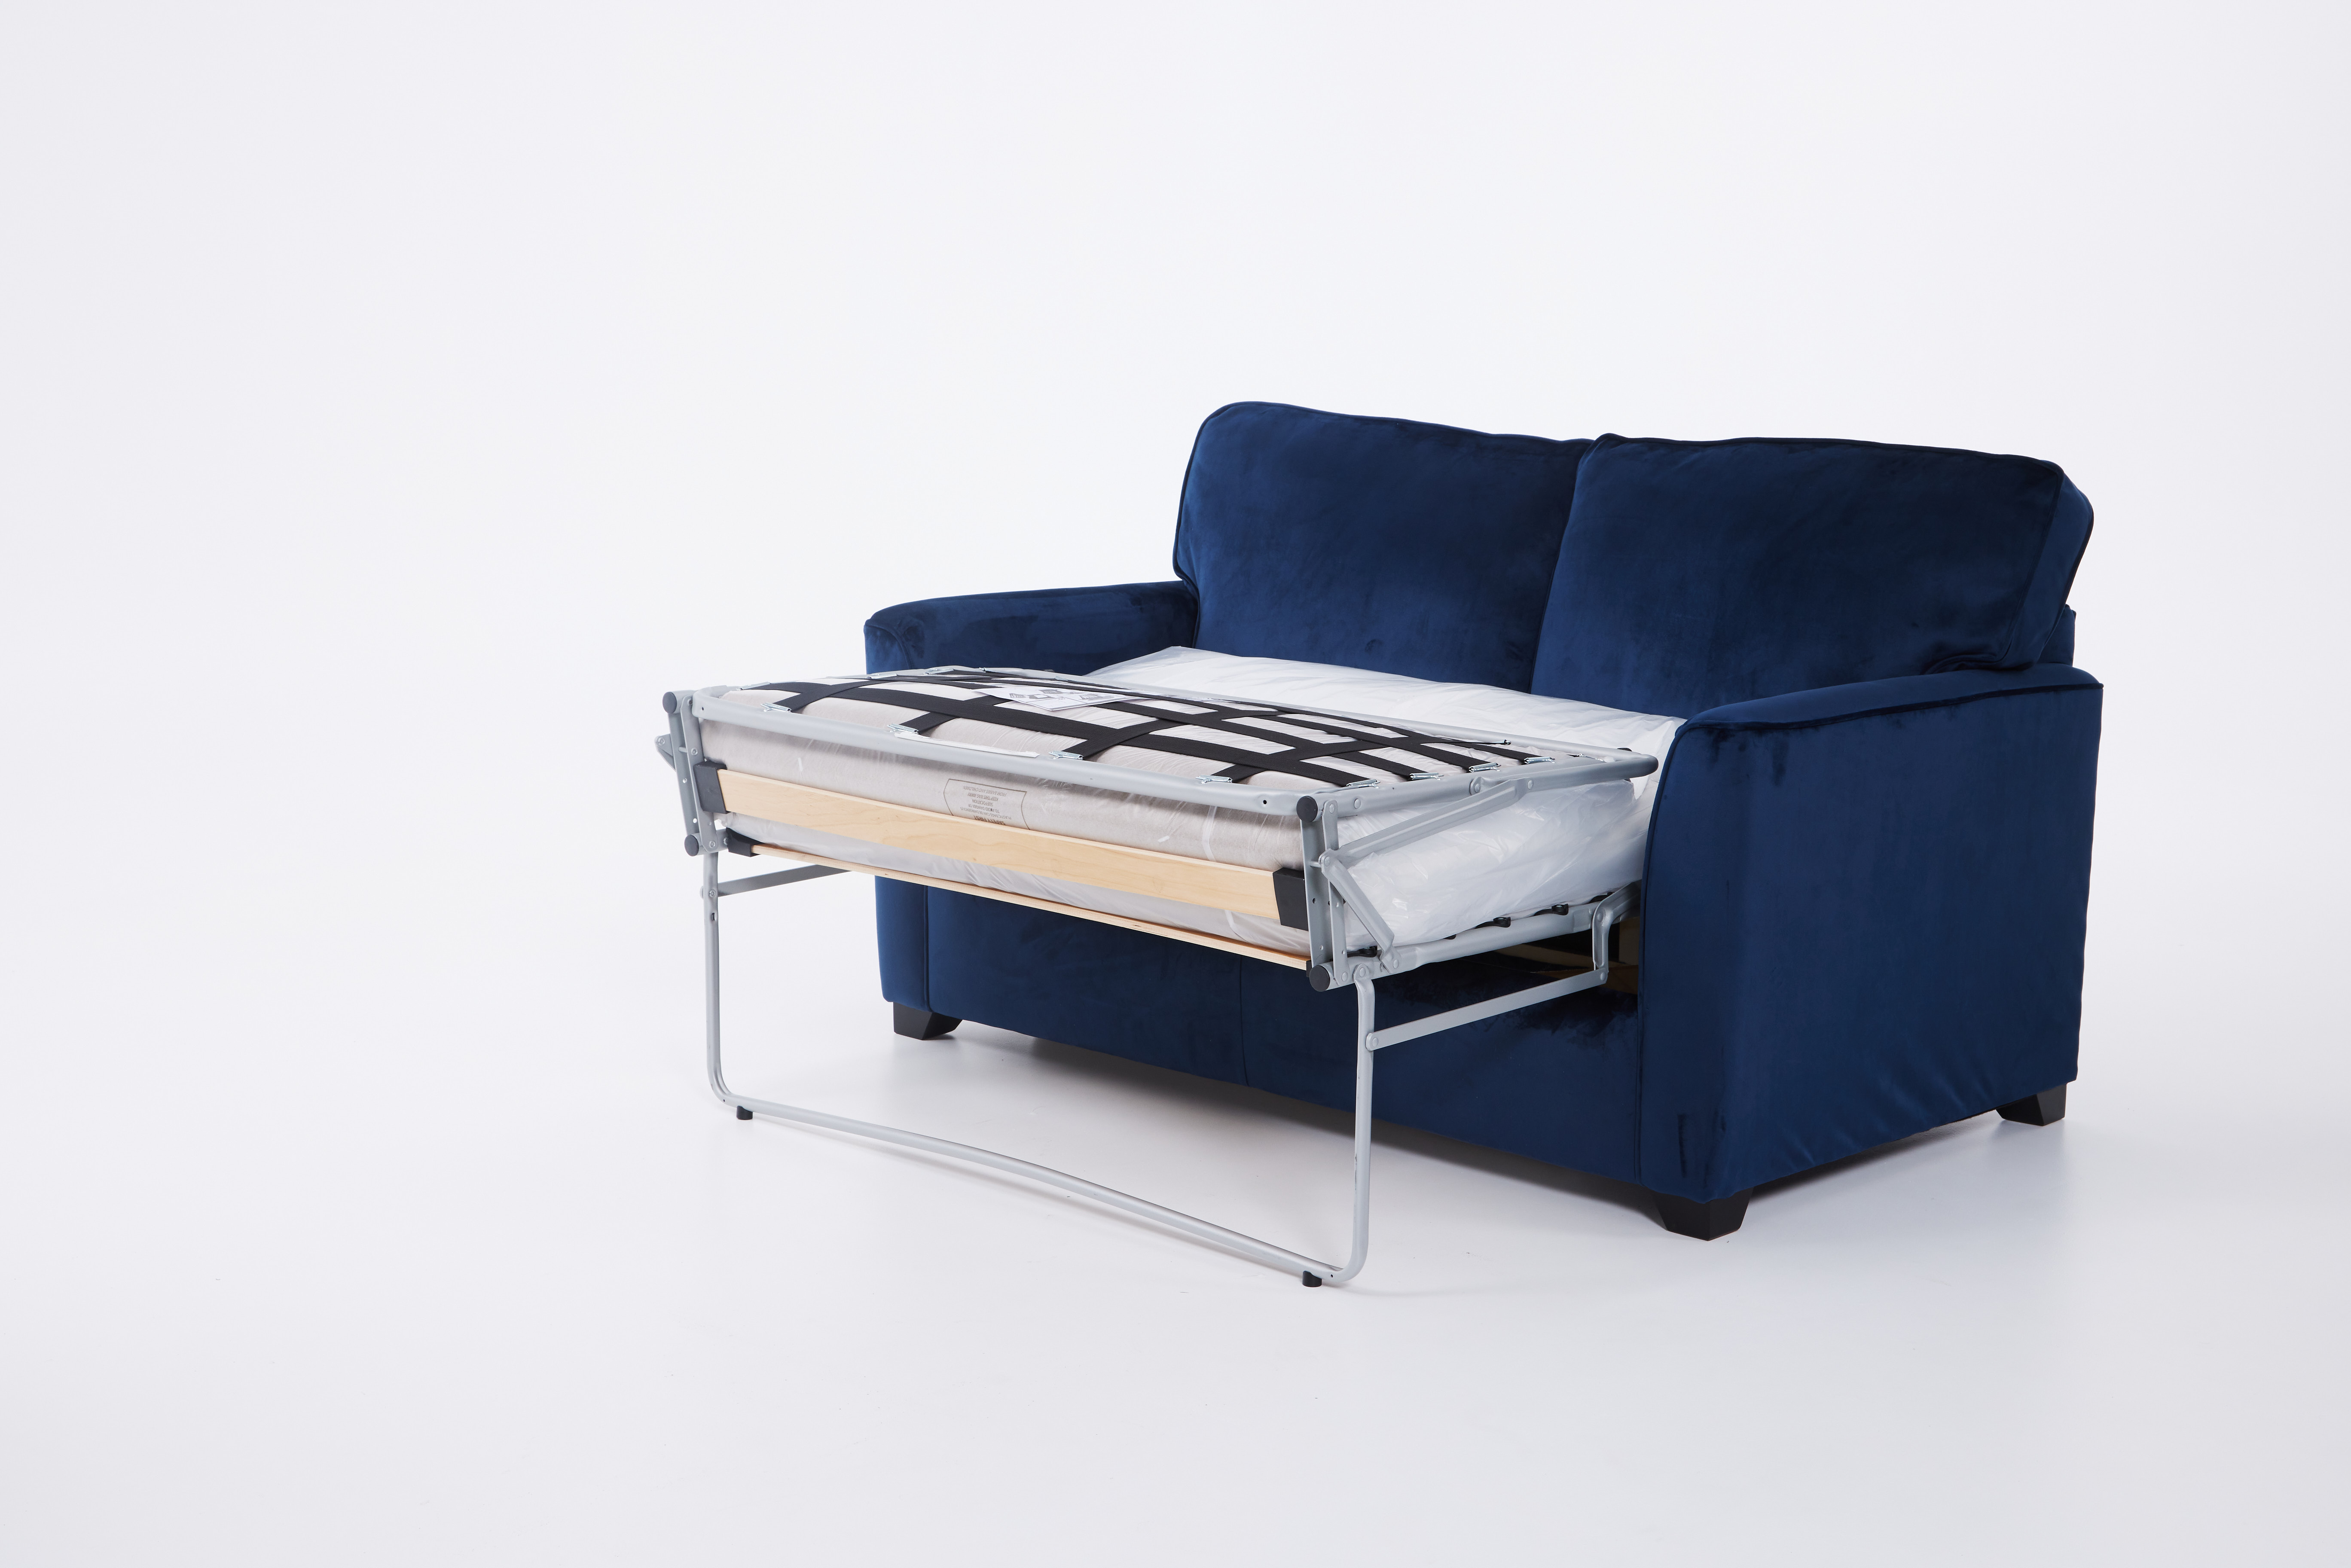 Piper 2 Seater Sofabed